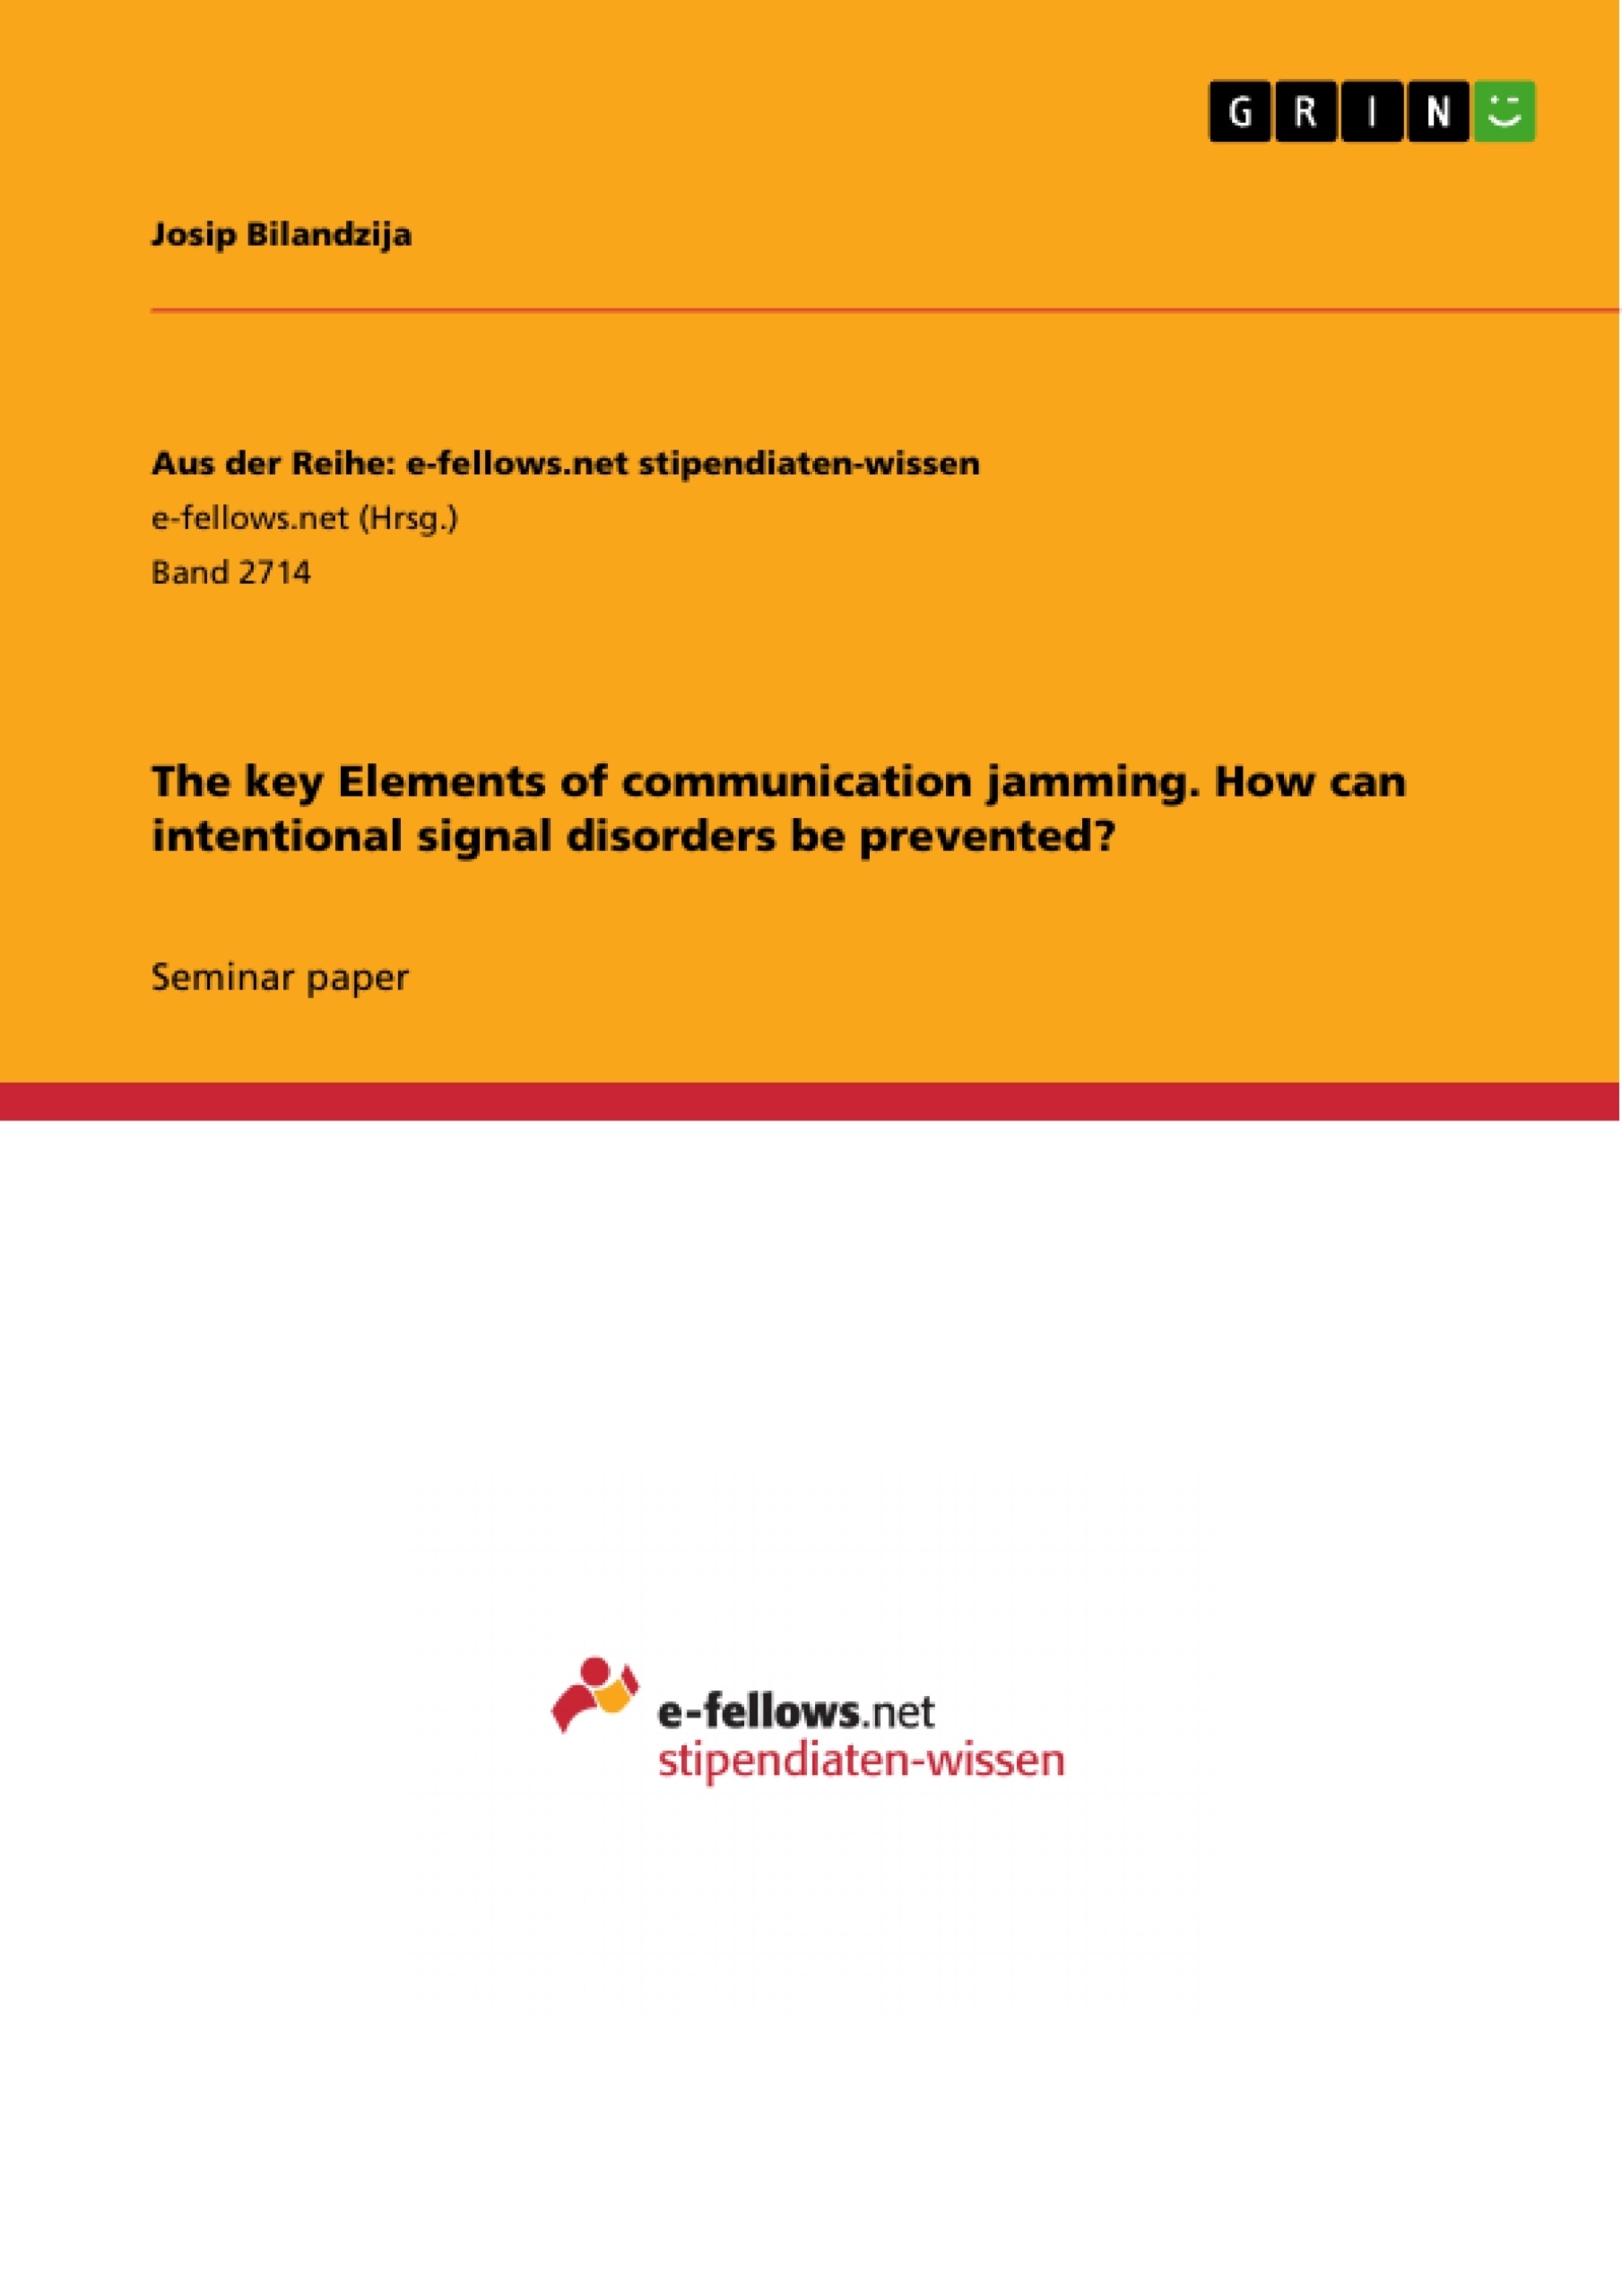 Título: The key Elements of communication jamming. How can intentional signal disorders be prevented?